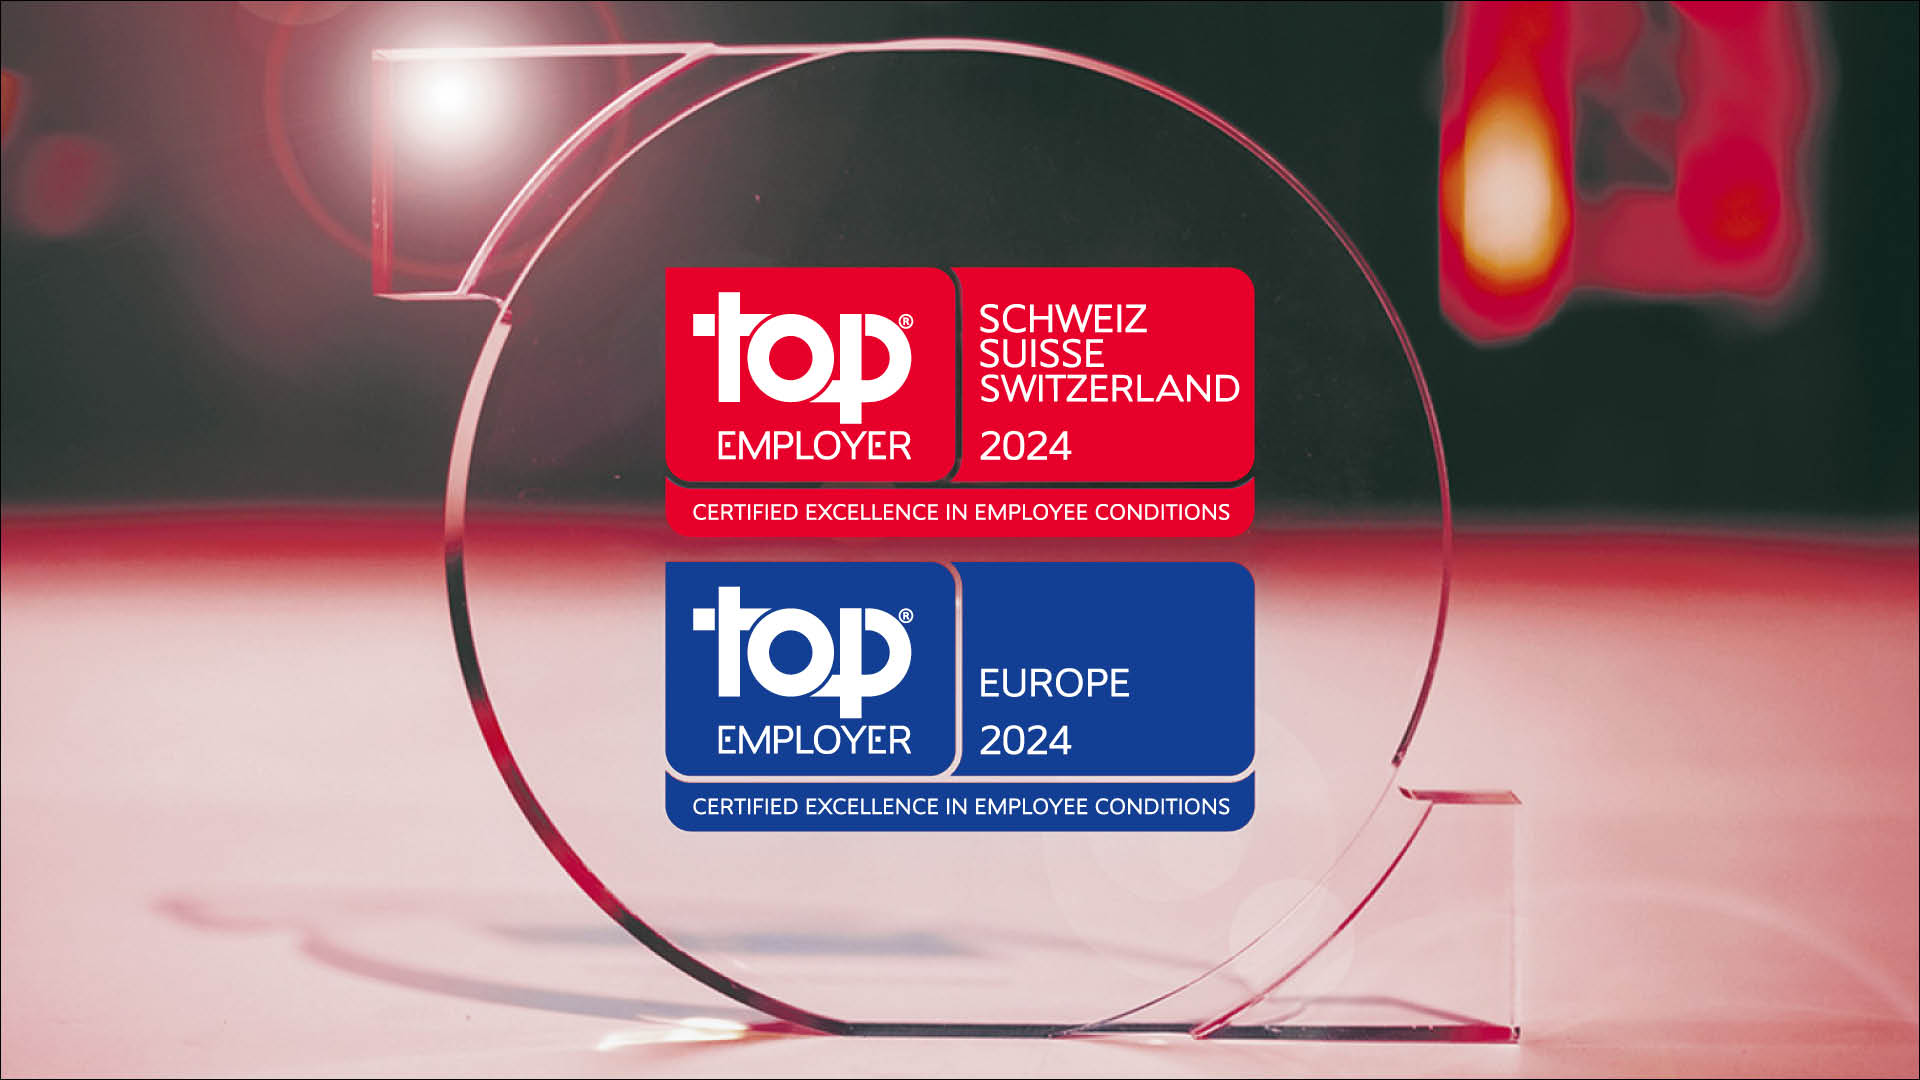 MSD Switzerland recognized as a Top Employer for the 12th consecutive year